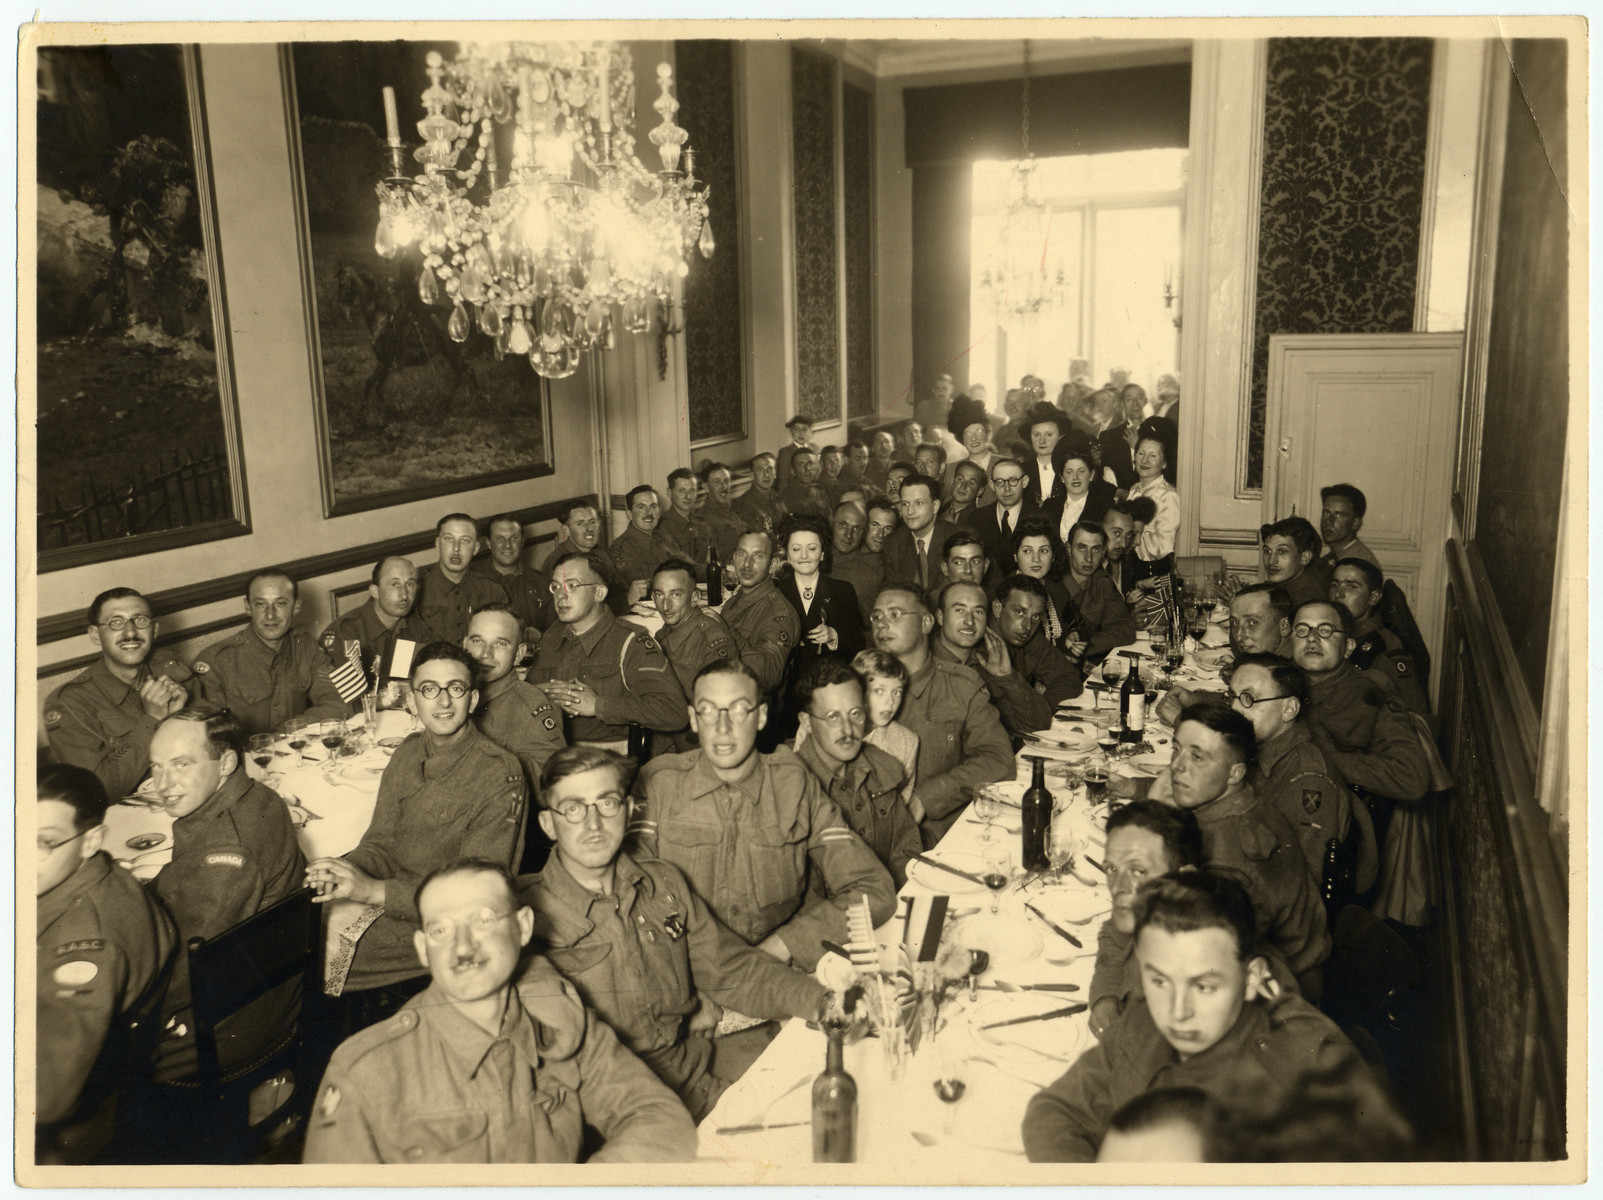 Members of the Jewish Brigade gather at set tables for a festive meal.

Fela Perelman is pictured in the middle.